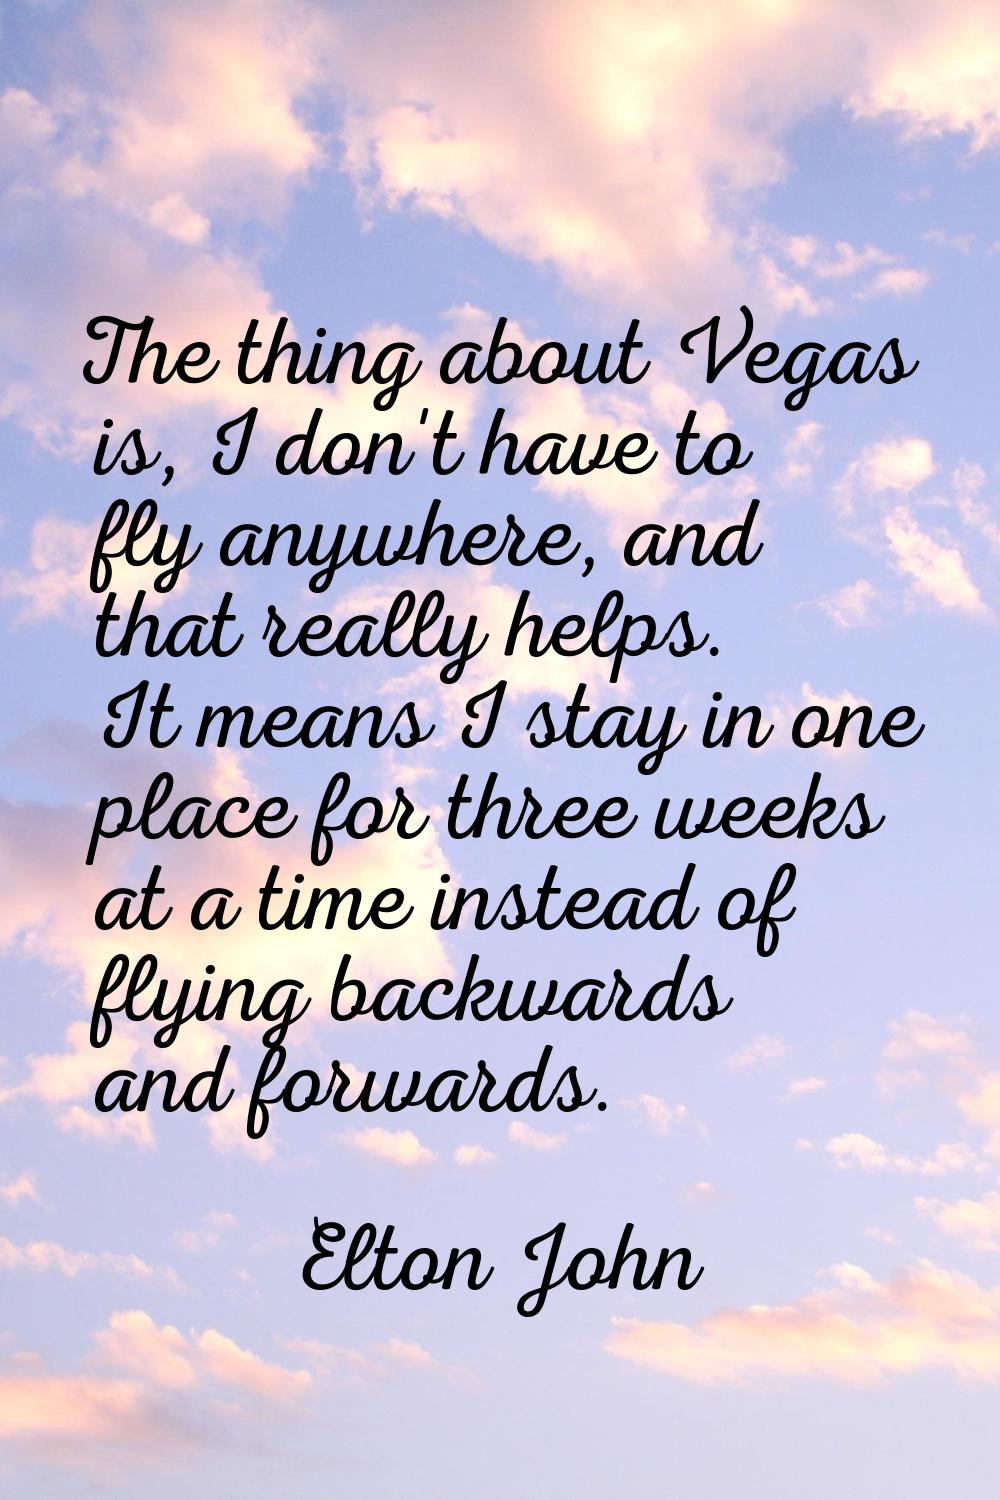 The thing about Vegas is, I don't have to fly anywhere, and that really helps. It means I stay in o